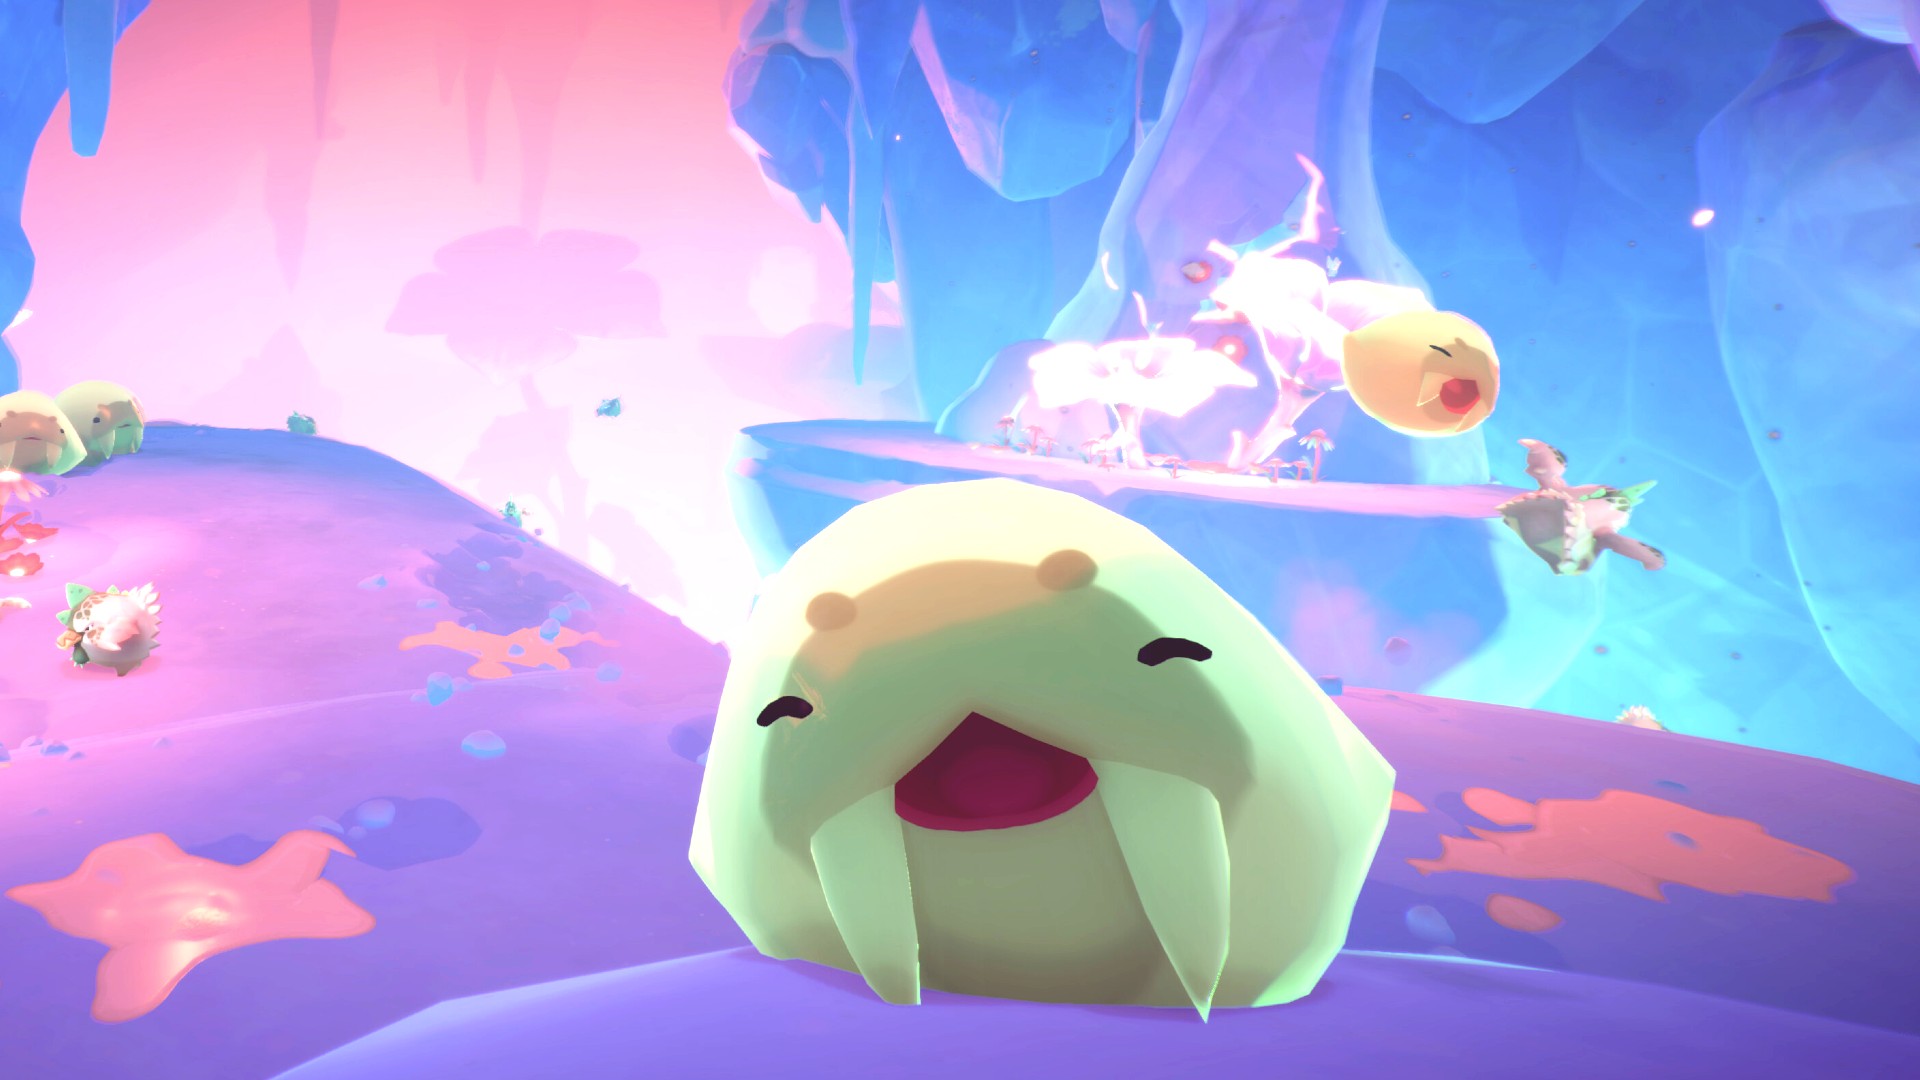 Slime Rancher 2 multiplayer: is there a co-op mode?